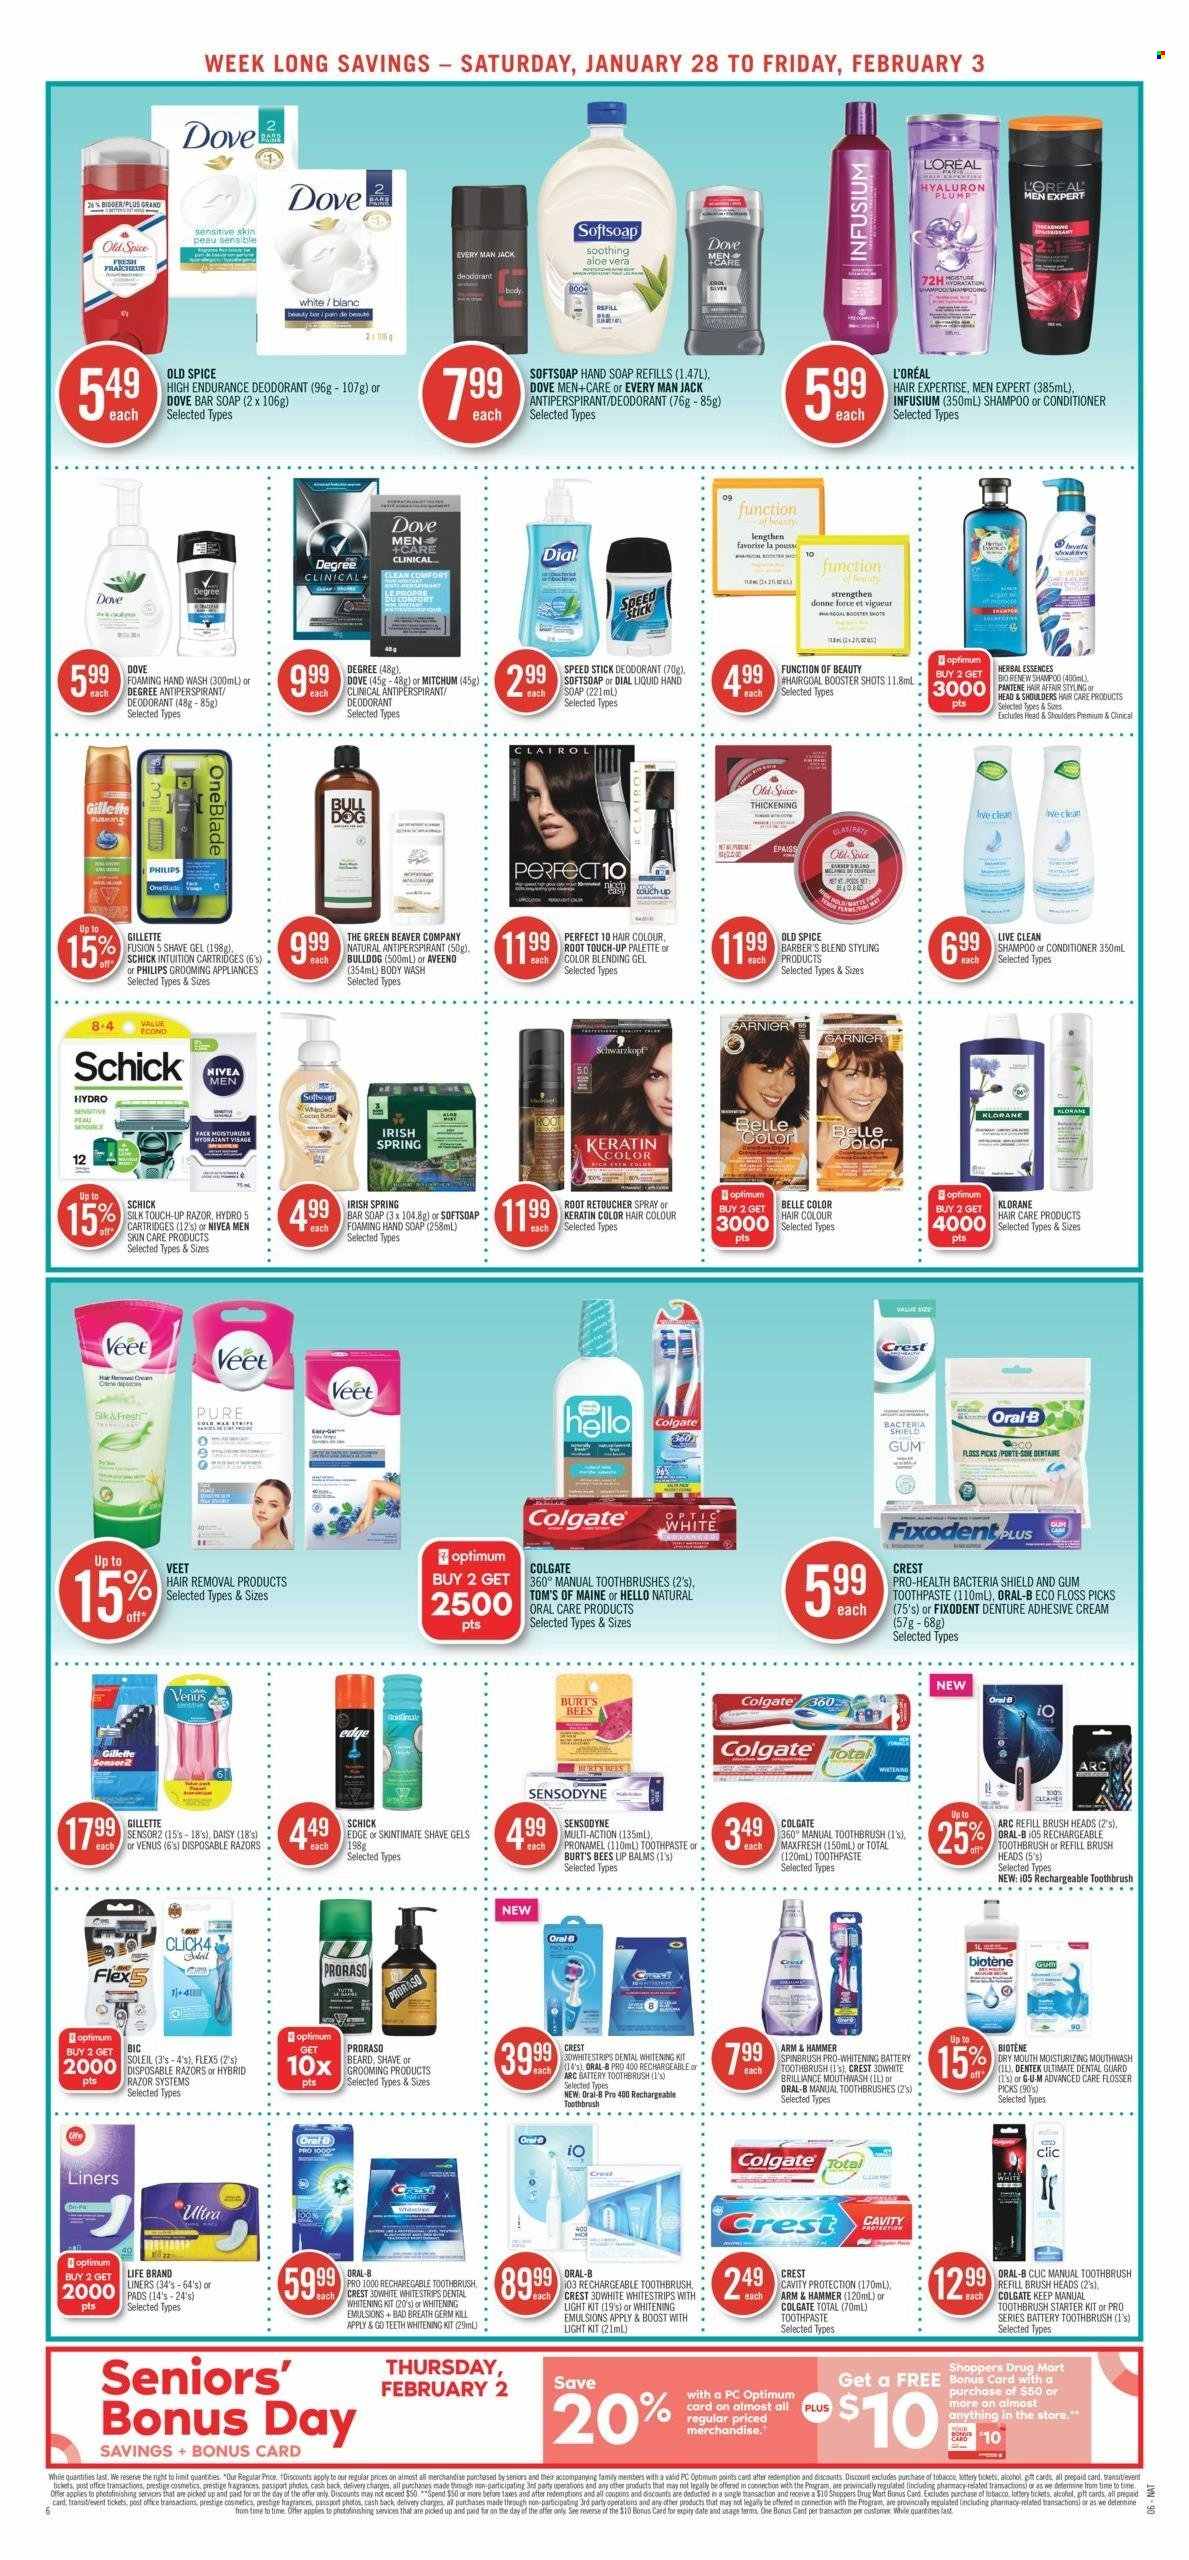 thumbnail - Shoppers Drug Mart Flyer - January 28, 2023 - February 03, 2023 - Sales products - Philips, Silk, Dove, ARM & HAMMER, spice, Boost, Aveeno, Nivea, cleaner, body wash, Softsoap, hand soap, hand wash, soap bar, Dial, soap, Biotene, toothbrush, toothpaste, mouthwash, Fixodent, Crest, Gillette, L’Oréal, moisturizer, L’Oréal Men, Root Touch-Up, Clairol, conditioner, Head & Shoulders, Palette, Pantene, hair color, Herbal Essences, keratin, Klorane, anti-perspirant, Speed Stick, BIC, razor, shave gel, Schick, Venus, hair removal, Veet, disposable razor, Optimum, alcohol, Colgate, Garnier, shampoo, Old Spice, Oral-B, Schwarzkopf, Sensodyne, deodorant. Page 11.